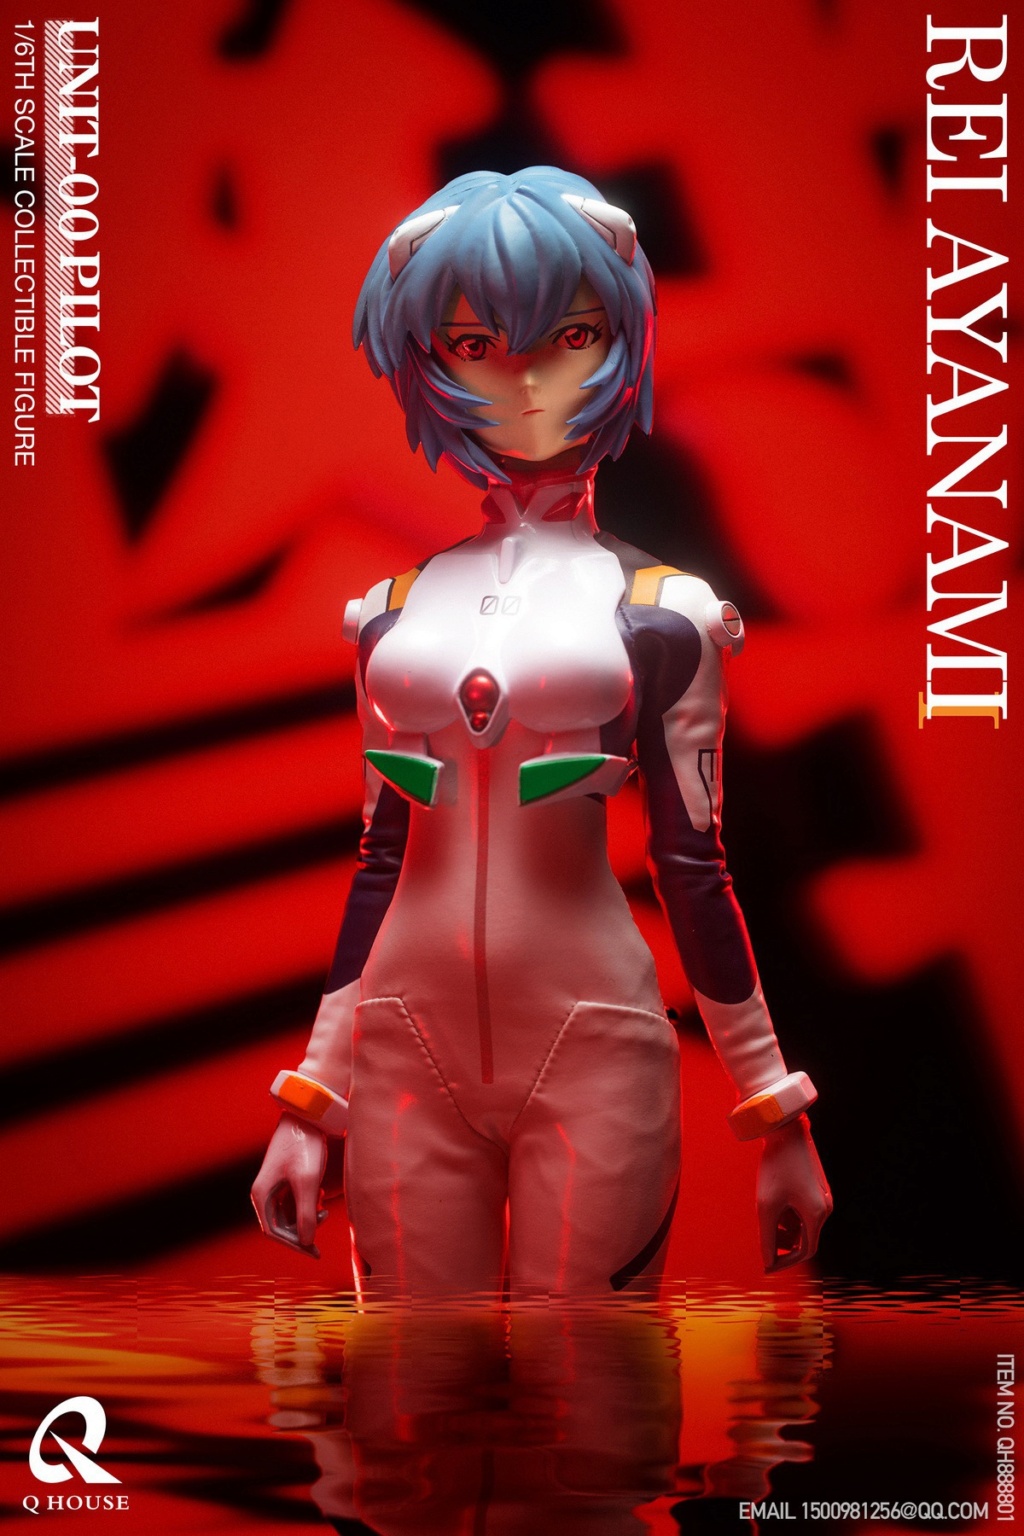 Anime - NEW PRODUCT: Q House: 1/6 Evangelion - Rei Ayanami  11143011